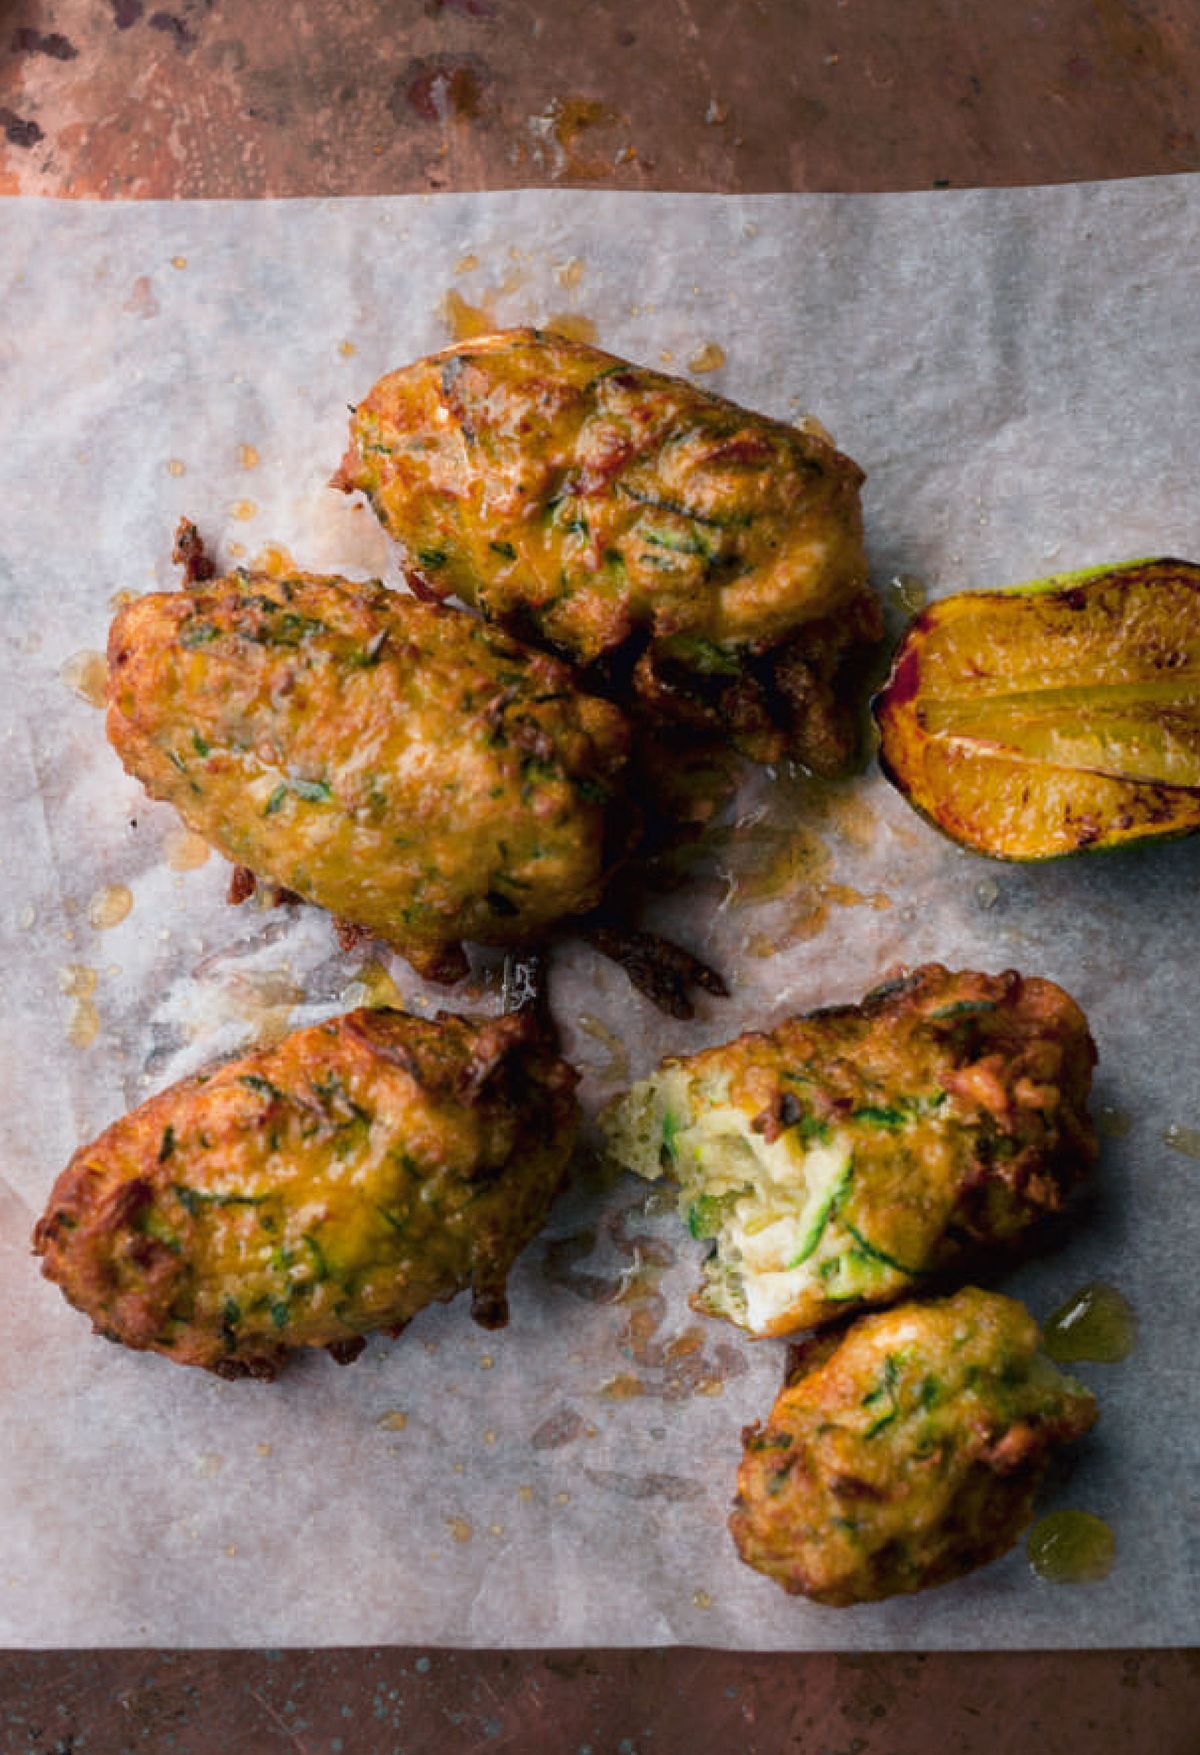 Ottolenghi’s Courgette and Manouri Fritters